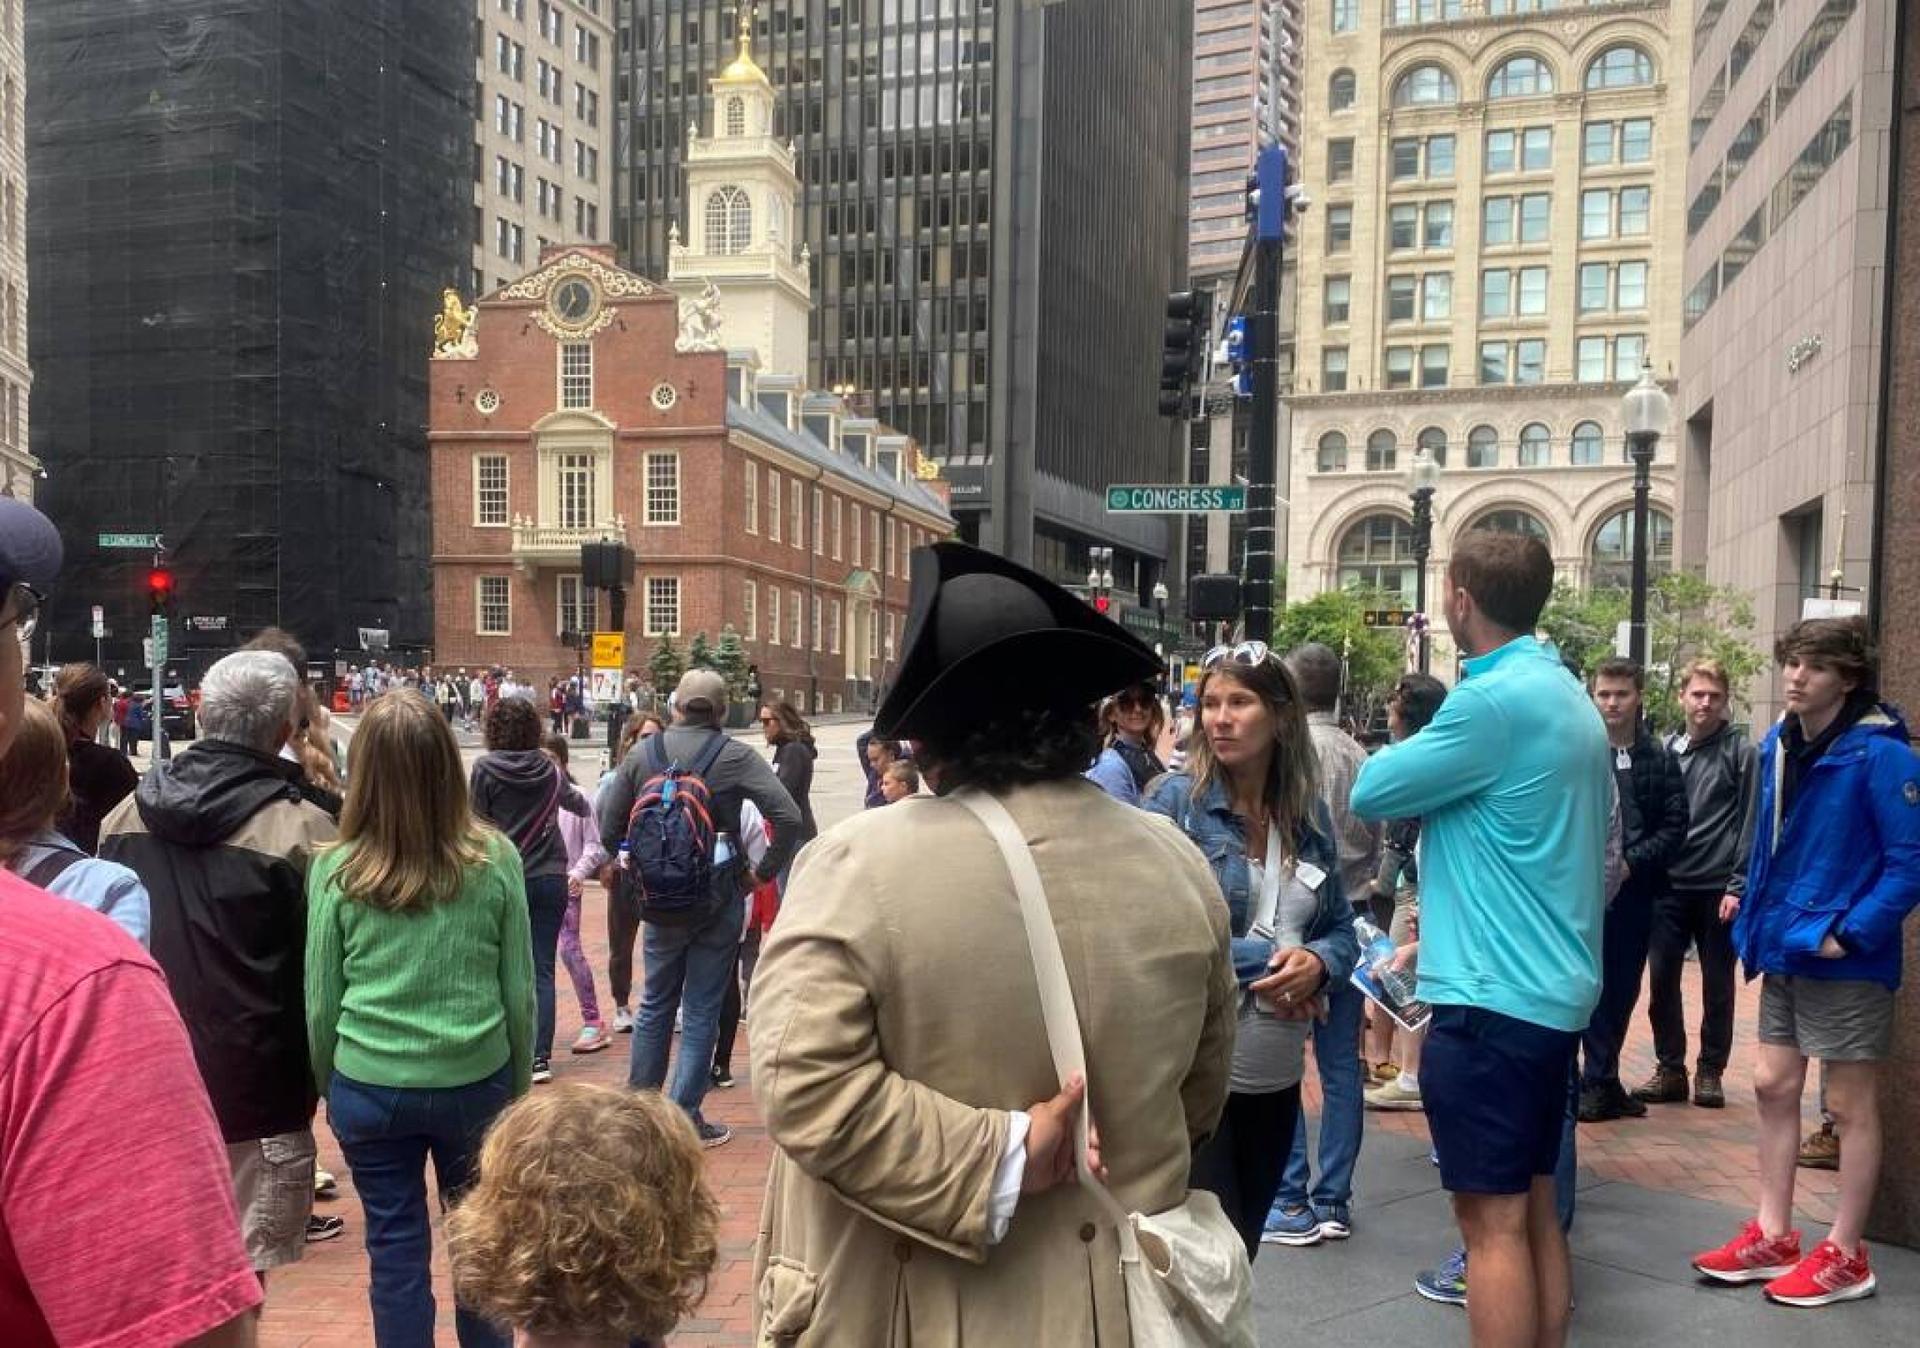 A Freedom Trail guide discusses the history of the Old State House with a tour group in downtown Boston.